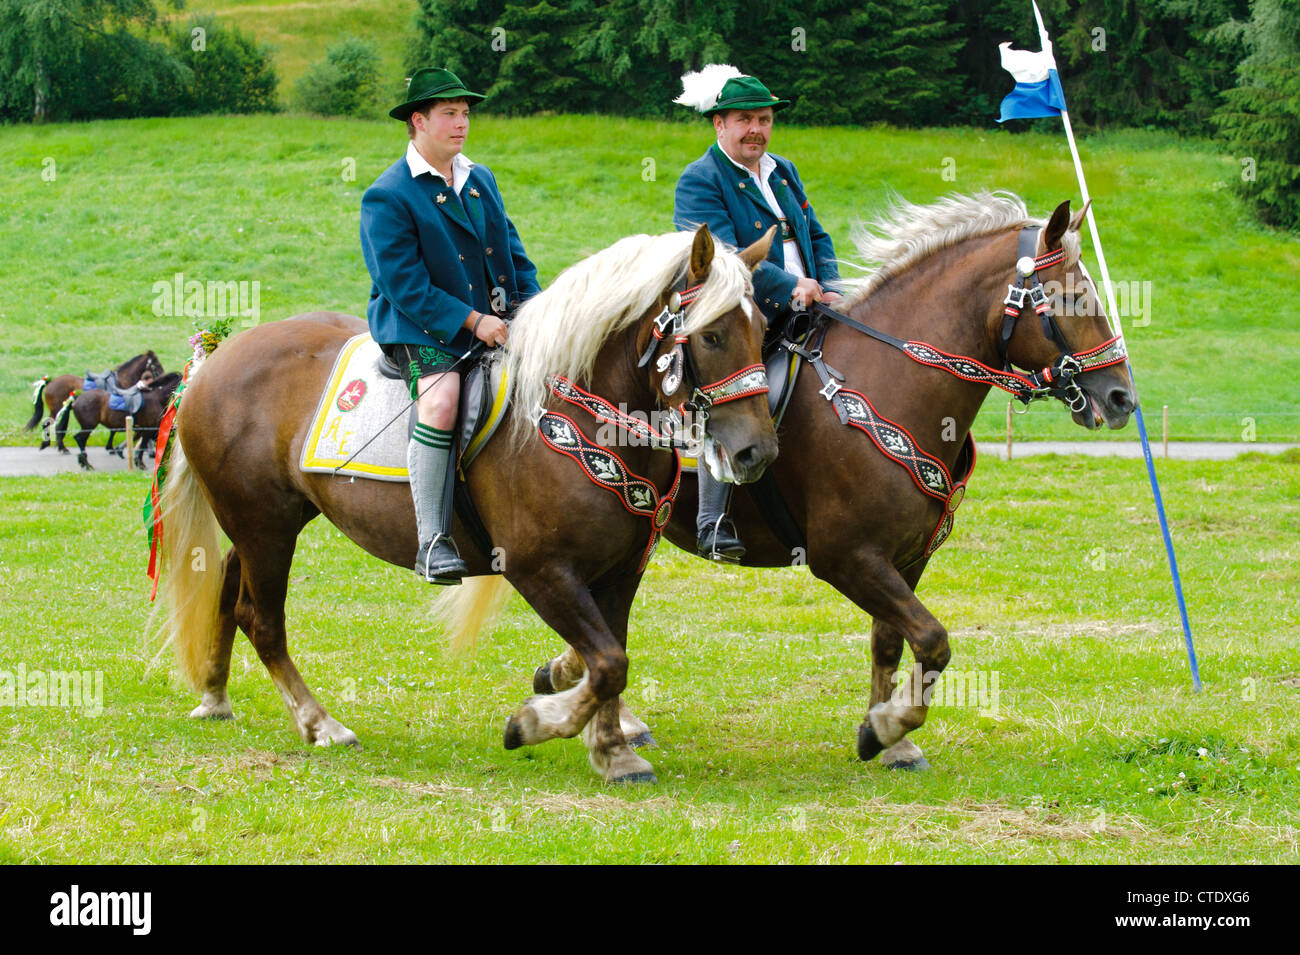 traditional and annual catholic horse parade in village Steingaden, Bavaria, Germany Stock Photo